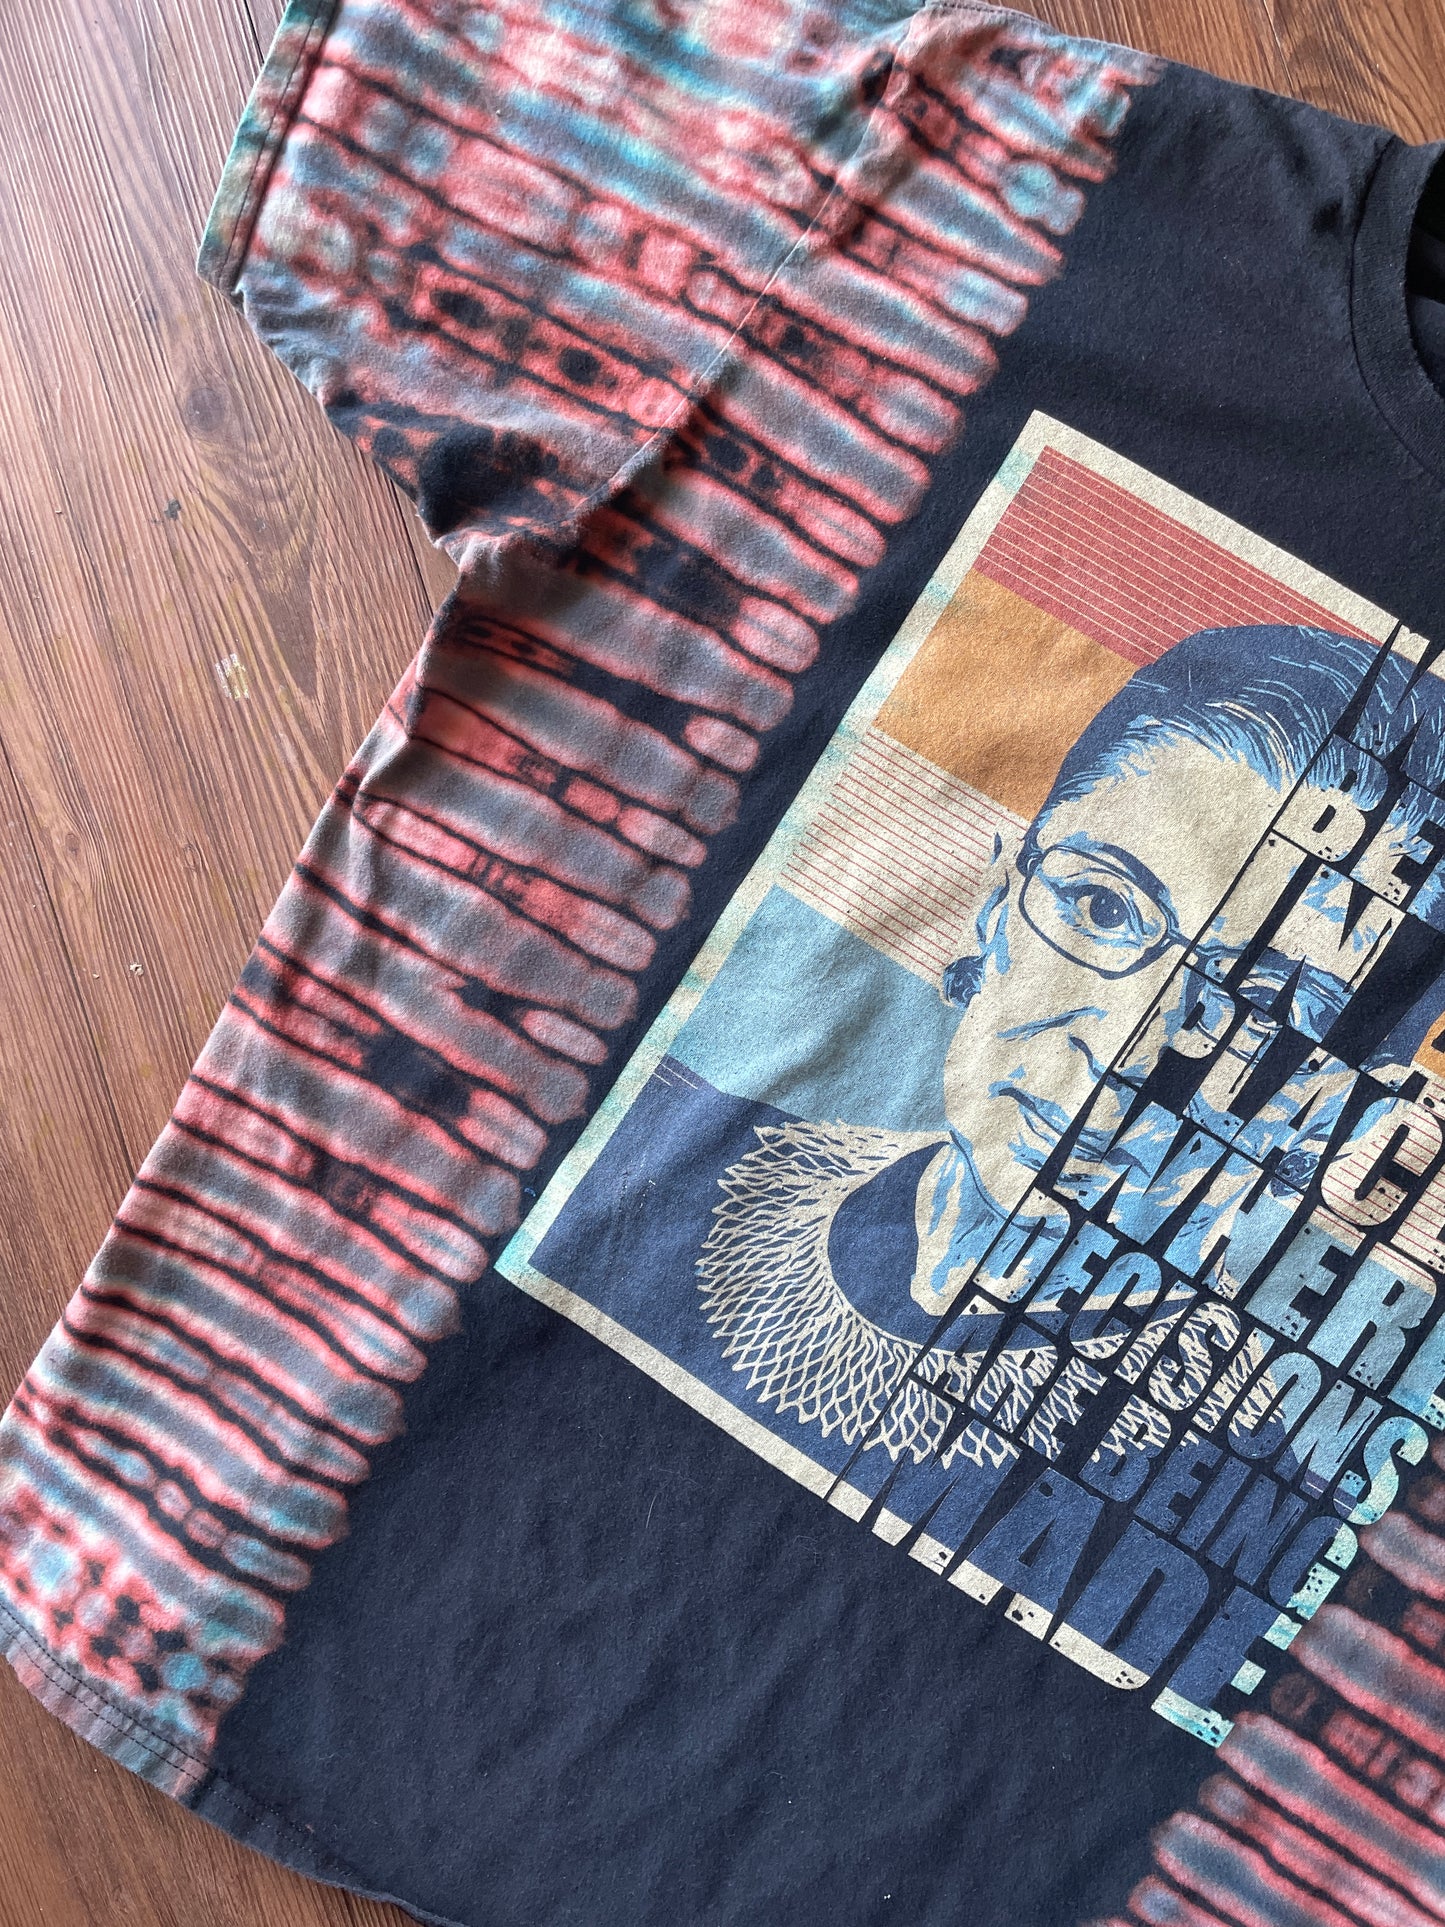 3XL Men’s Ruth Bader Ginsburg Quote Handmade Reverse Tie Dye T-Shirt | One-Of-a-Kind Black and Blue Short Sleeve